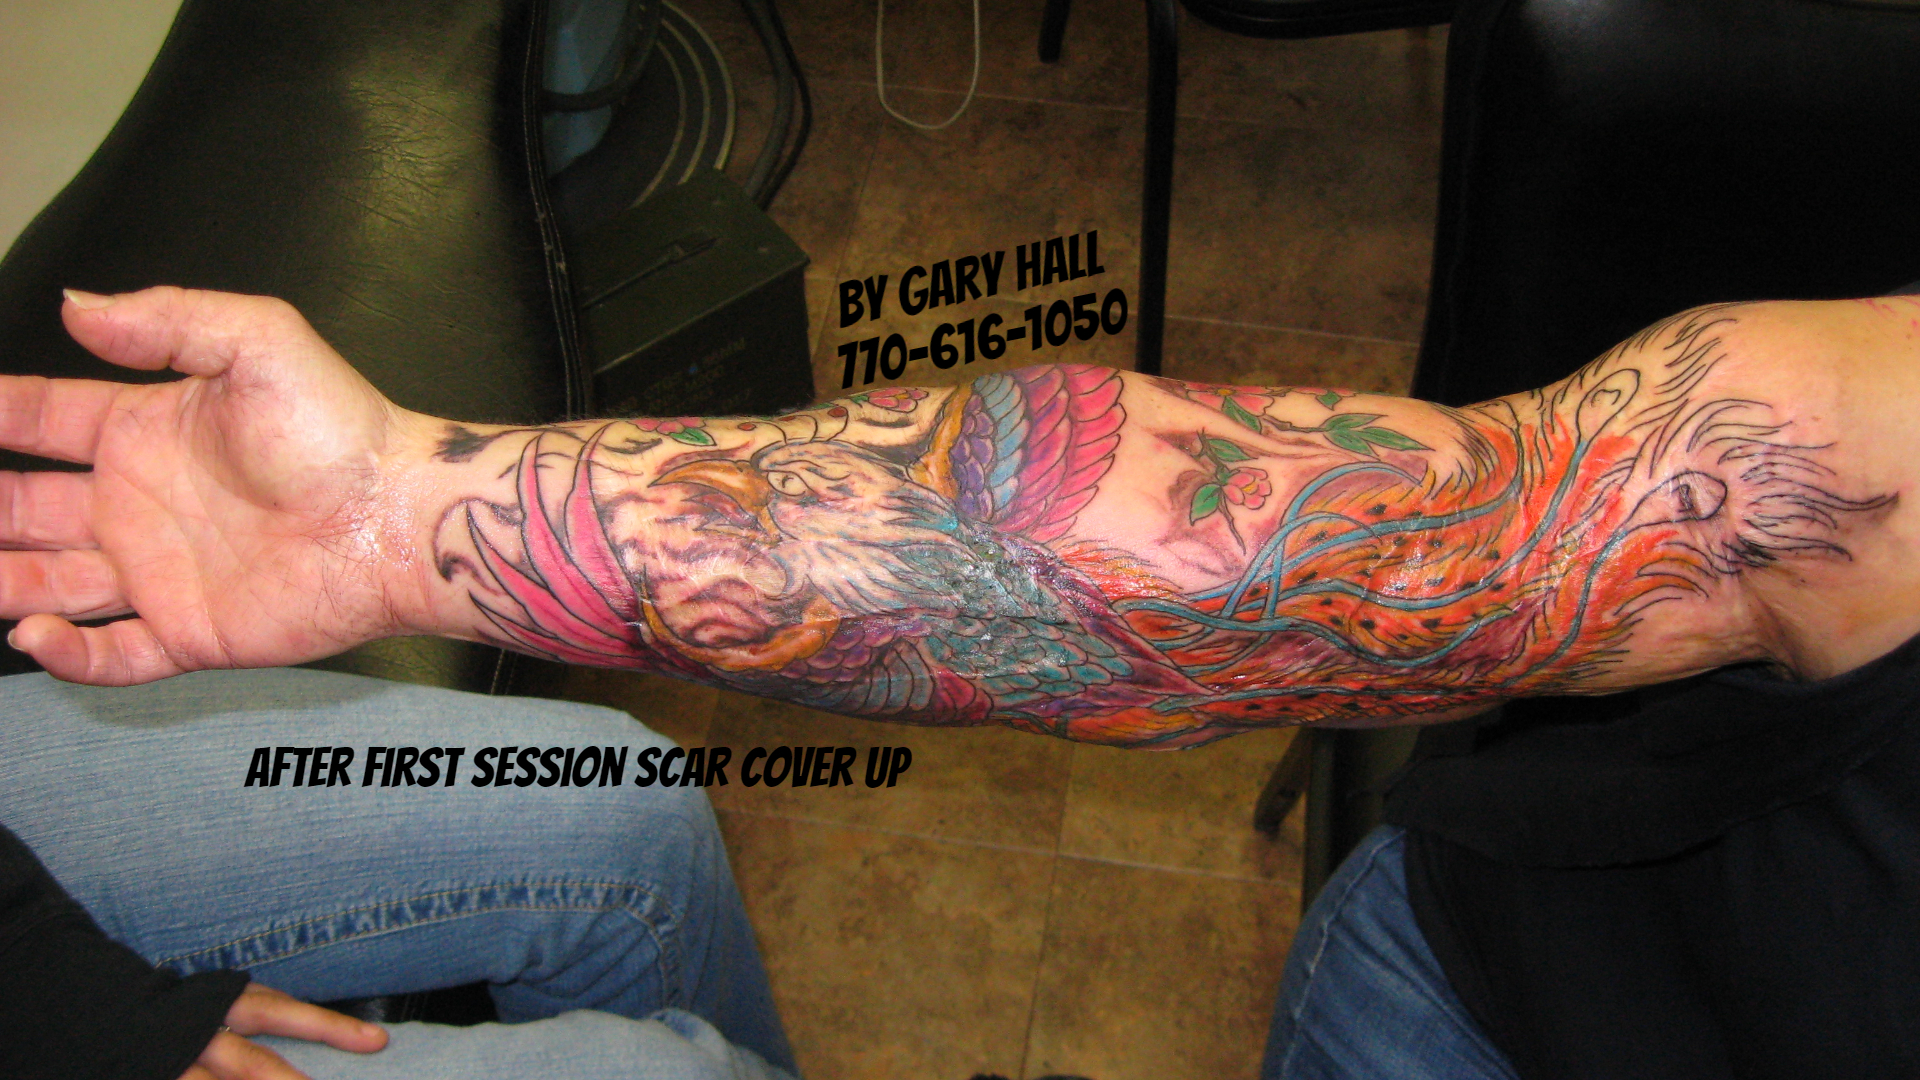 After First Session Scar Cover Up